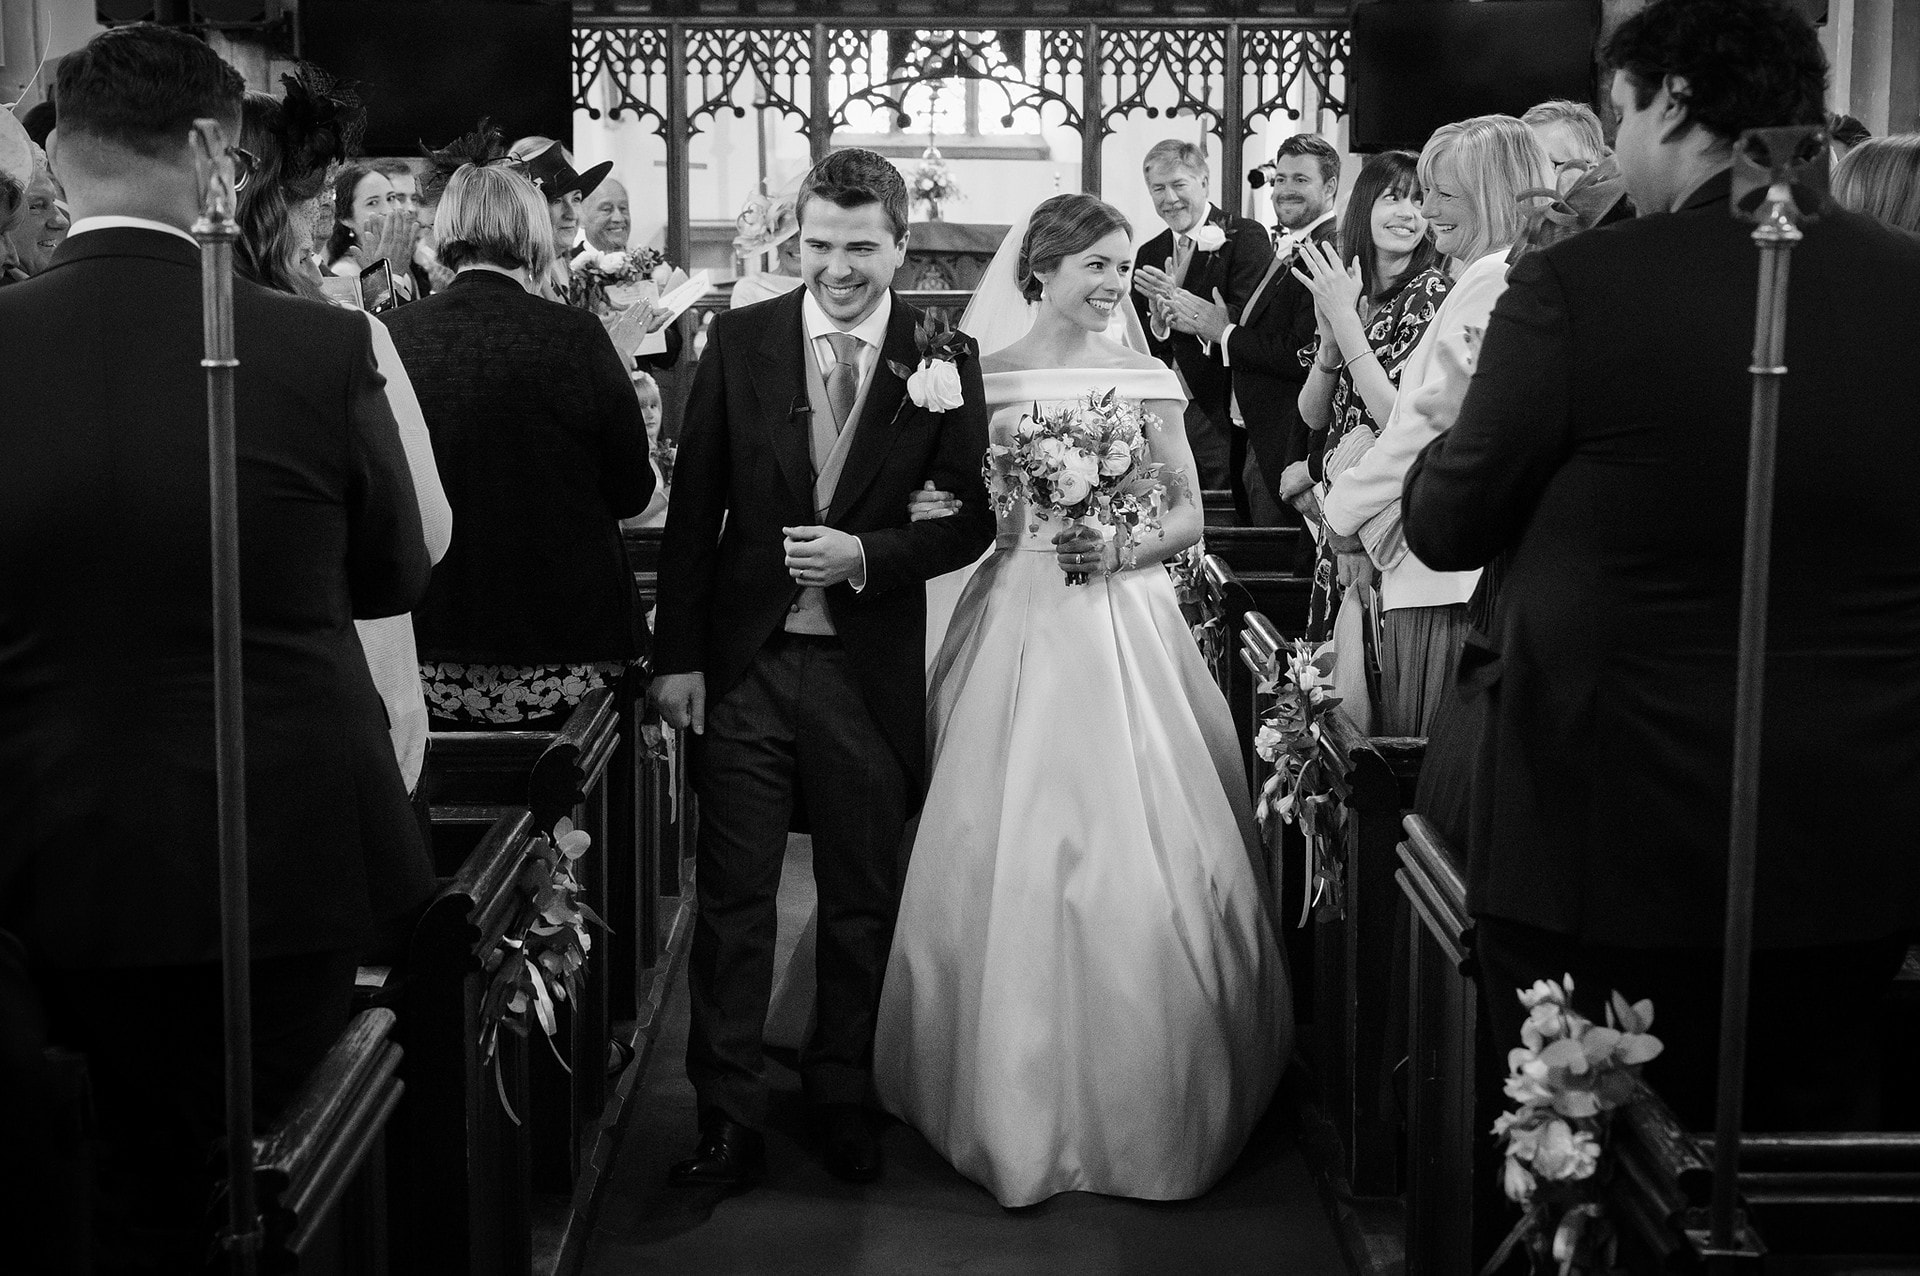 Bride and groom walking down the aisle at St Catherine's church in Houghton on the Hill